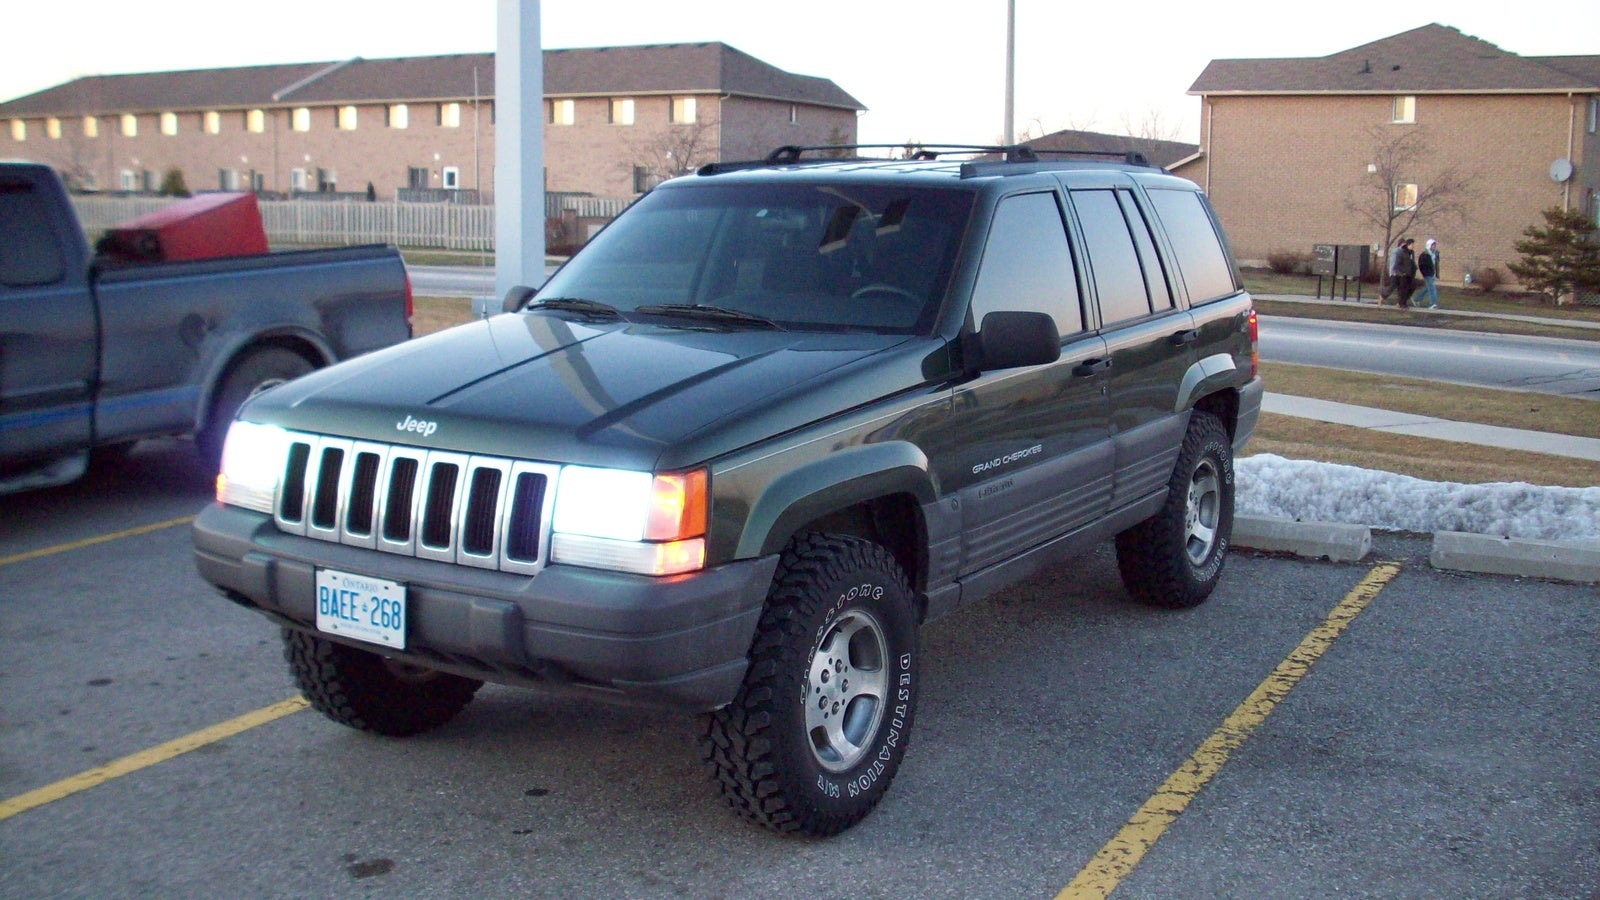 1996 Jeep grand cherokee limited owner manual